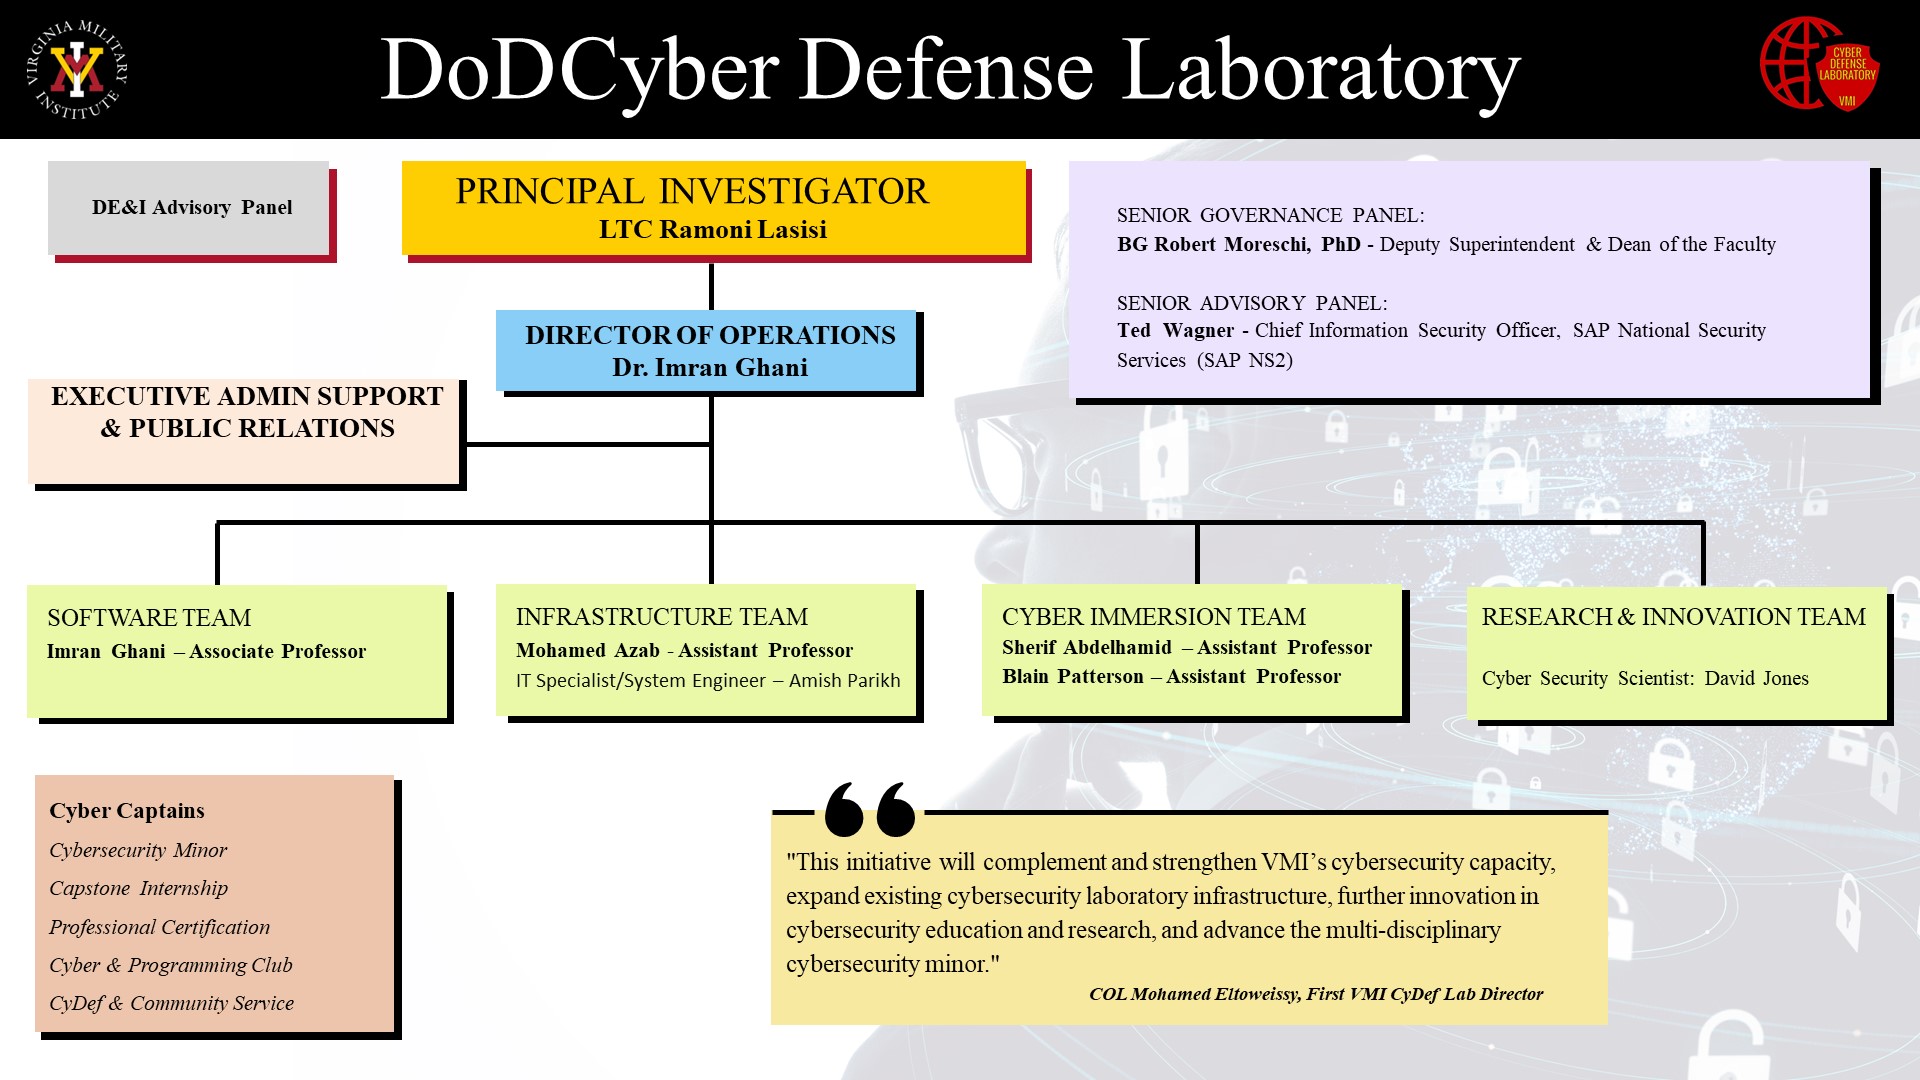 VMI's DoD Cyber Defense Laboratory Org Chart -  accessible PDF version linked below